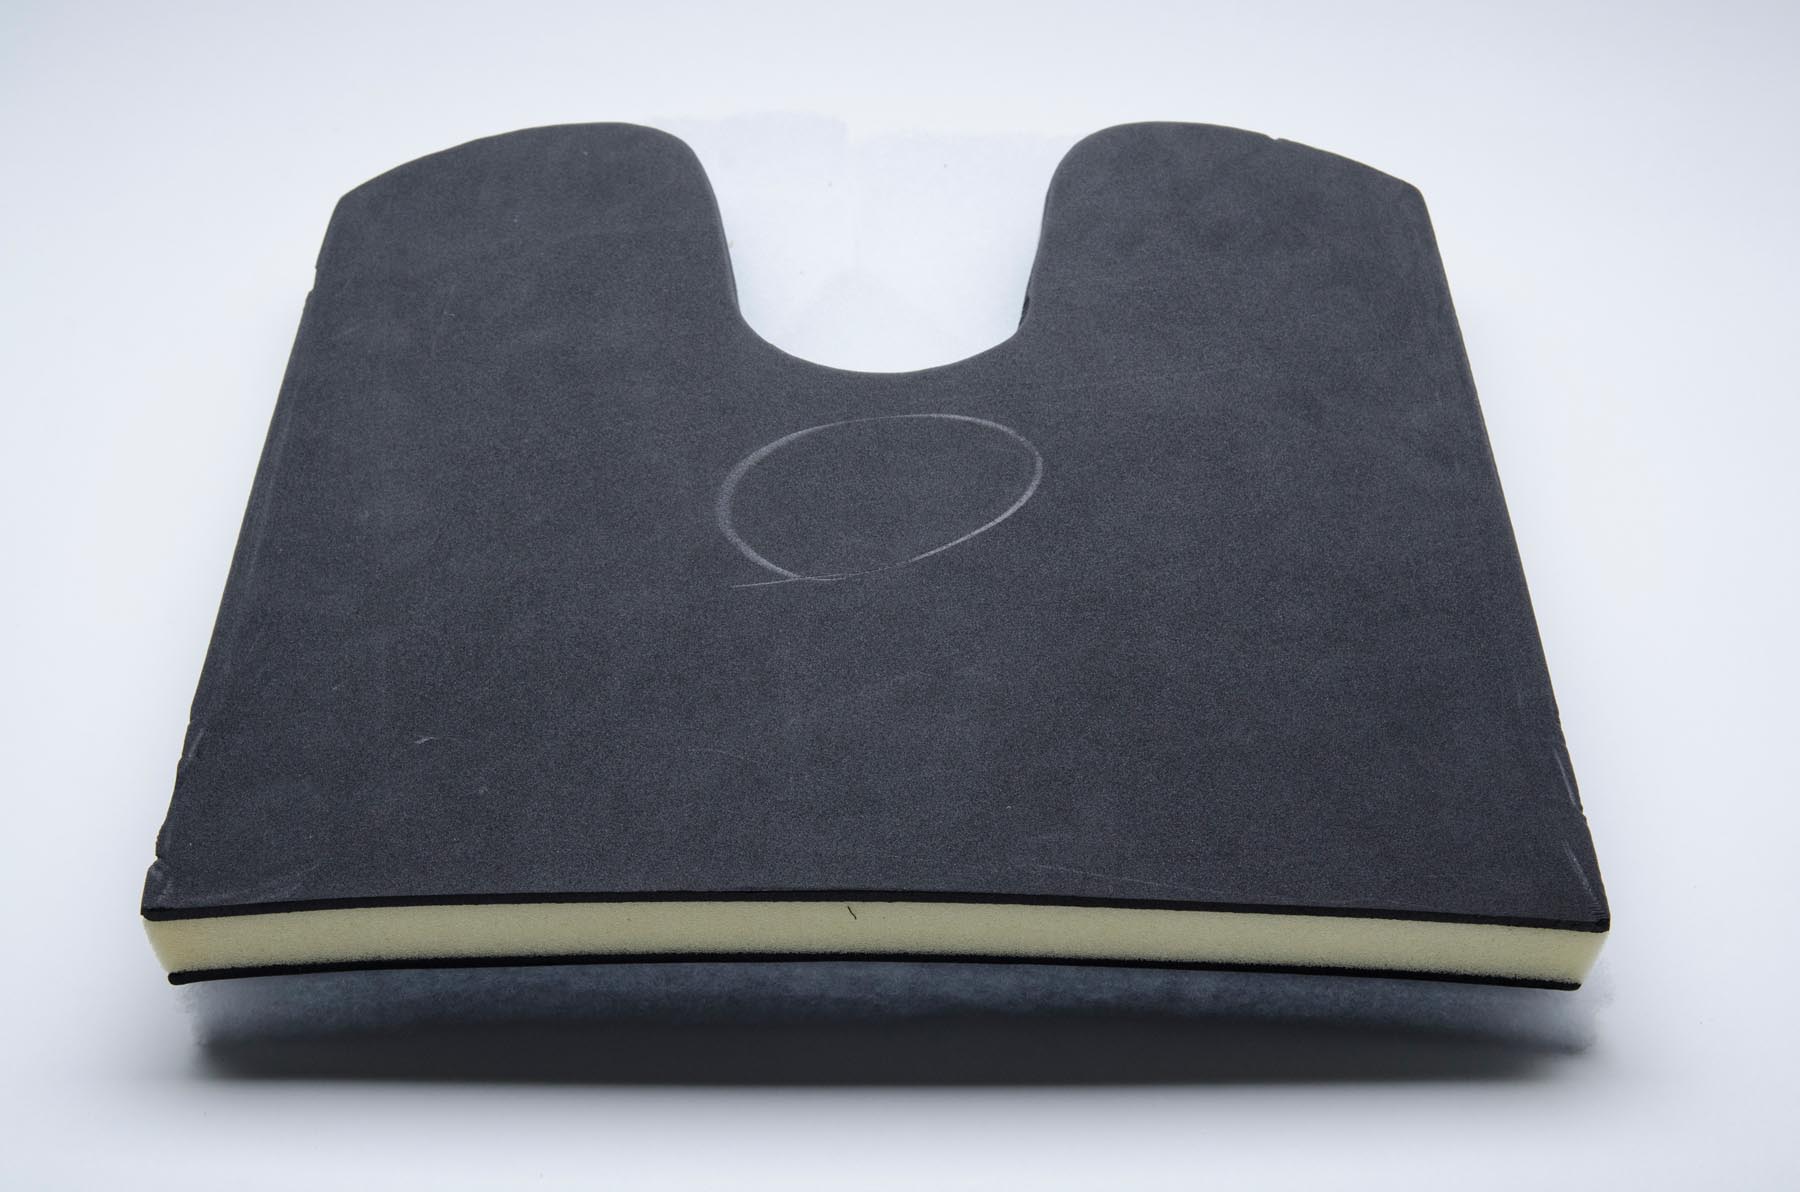 TheraSeat-A Discreet Seat Cushion for Sitting Pain - CMT Medical